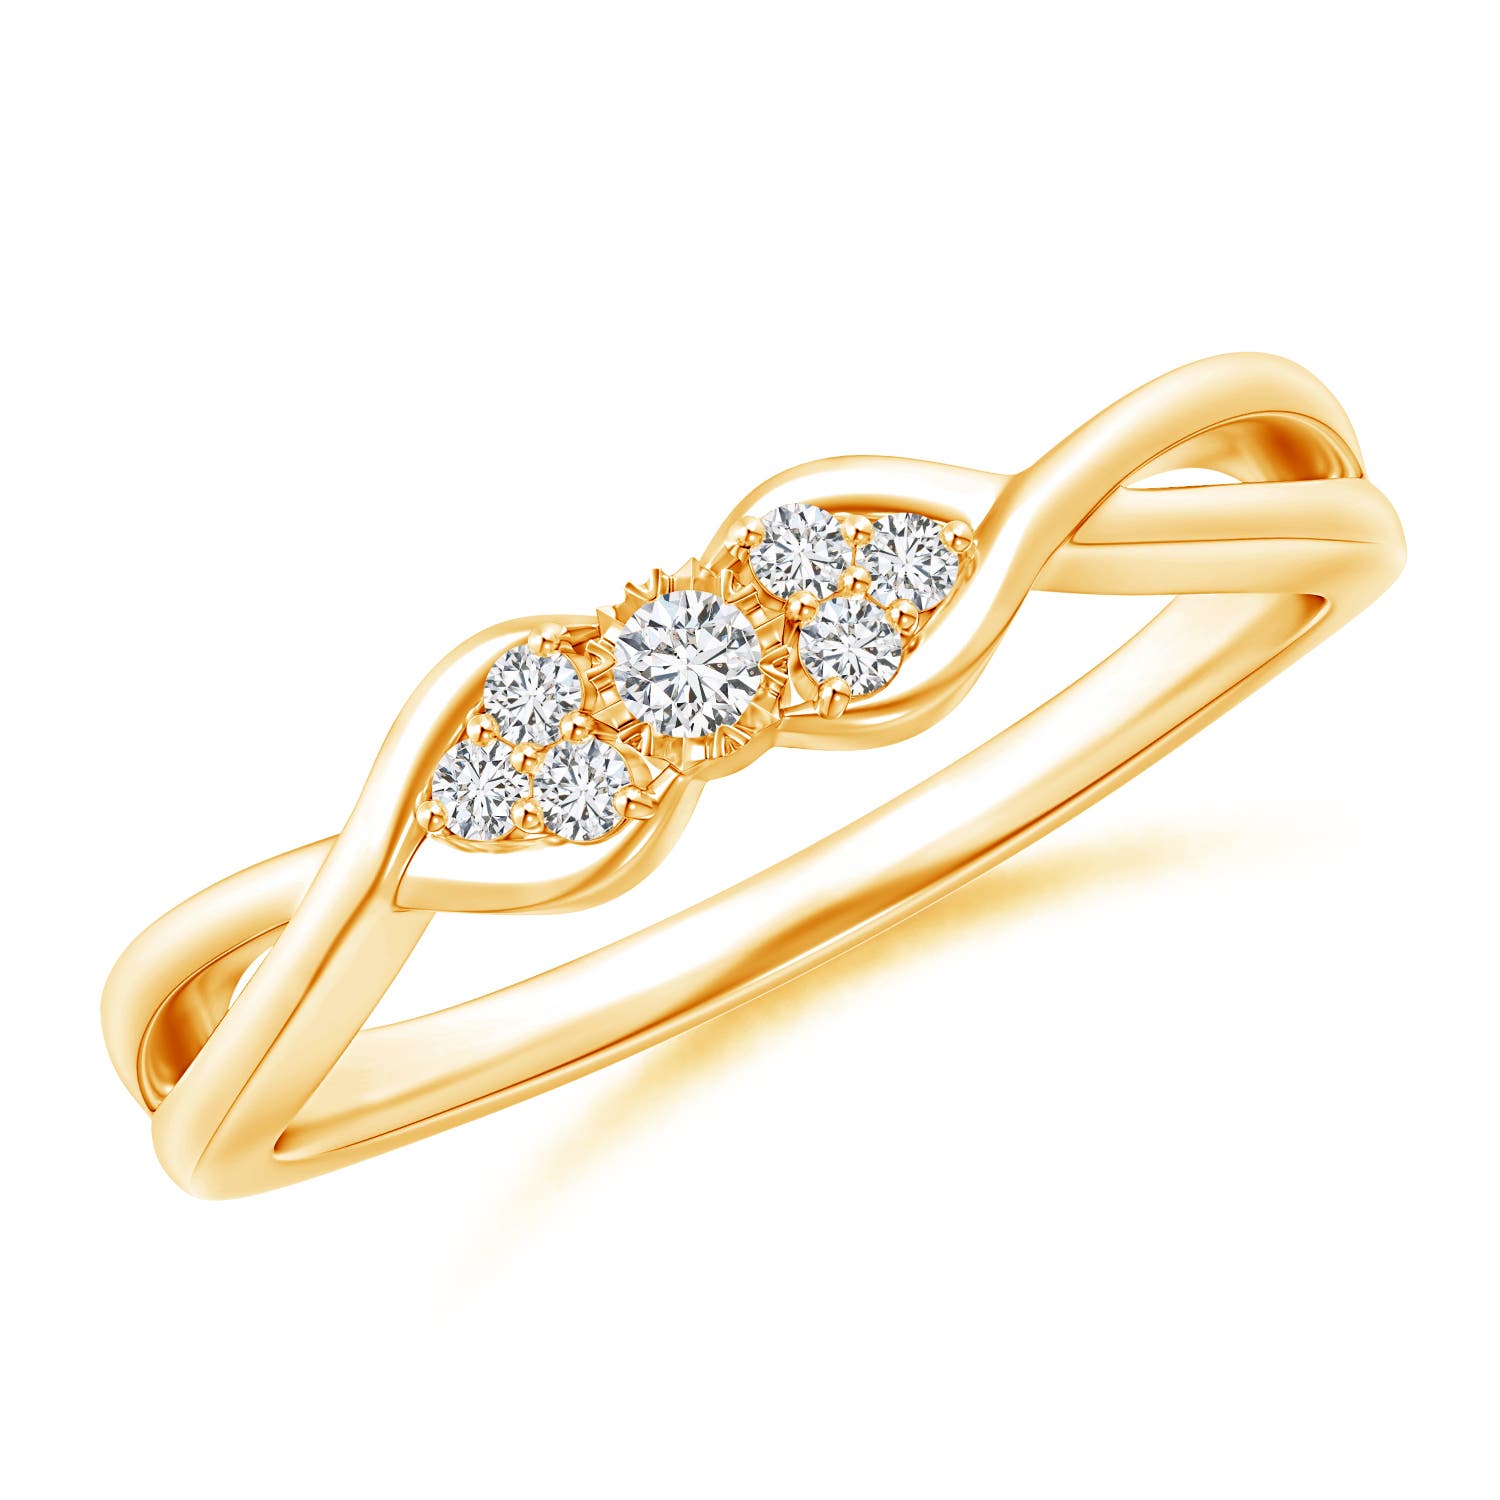 H, SI2 / 0.11 CT / 14 KT Yellow Gold